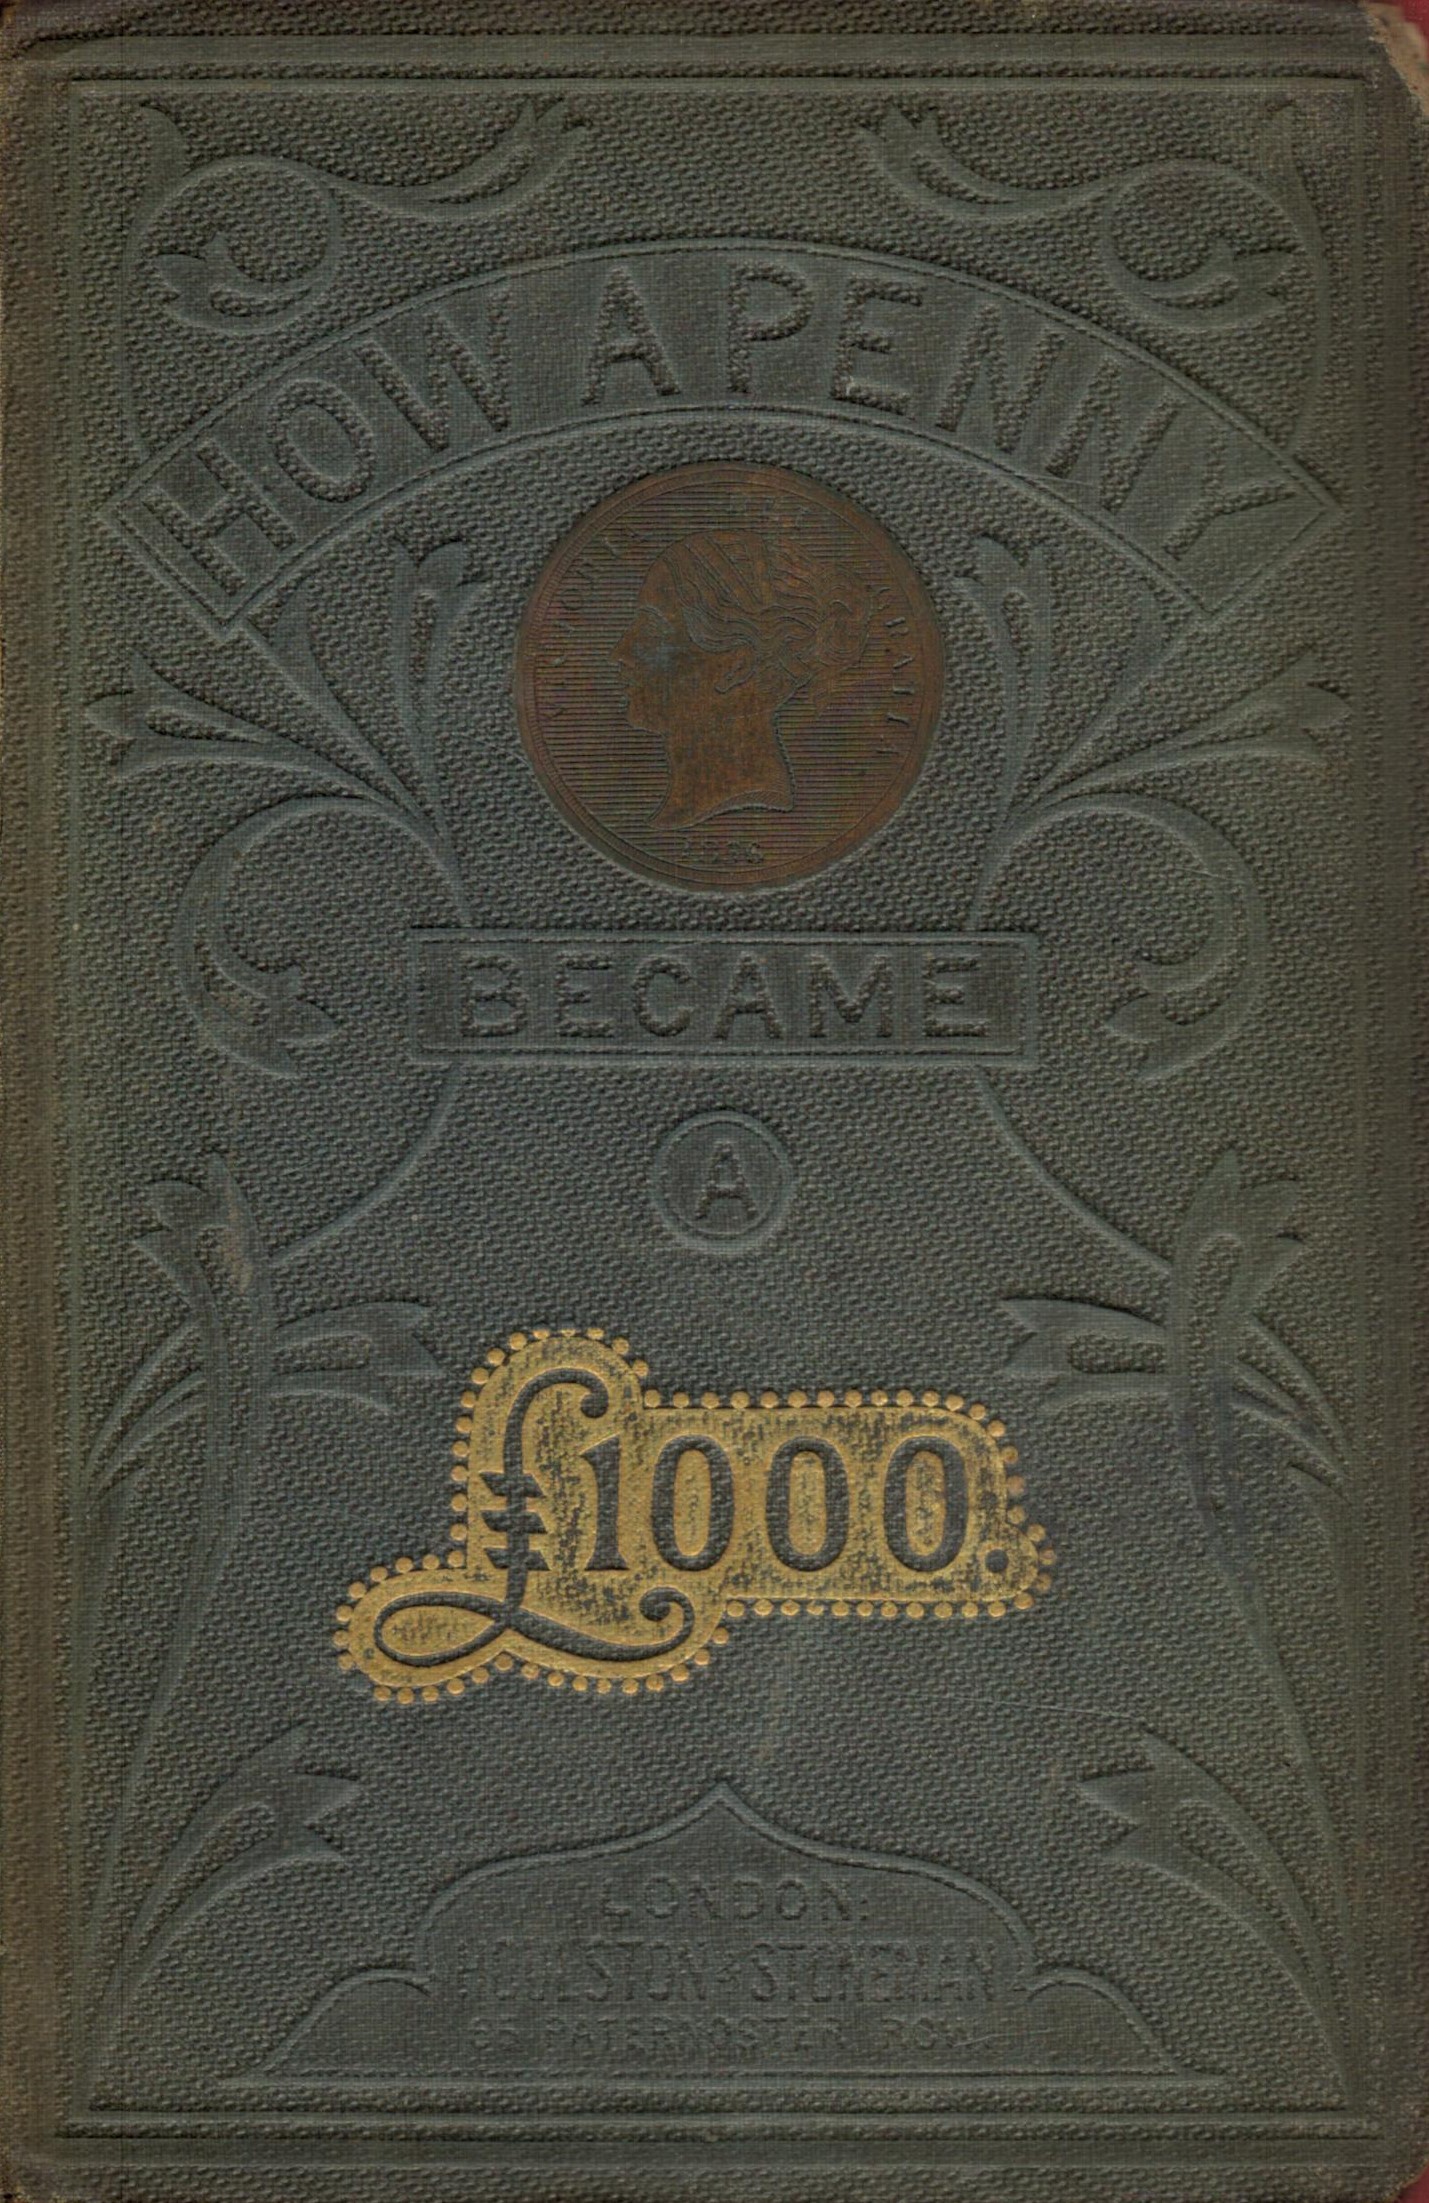 How A Penny Made A Thousand Pounds. Published by Houlston and Stoneman. London. 1856. Publisher's